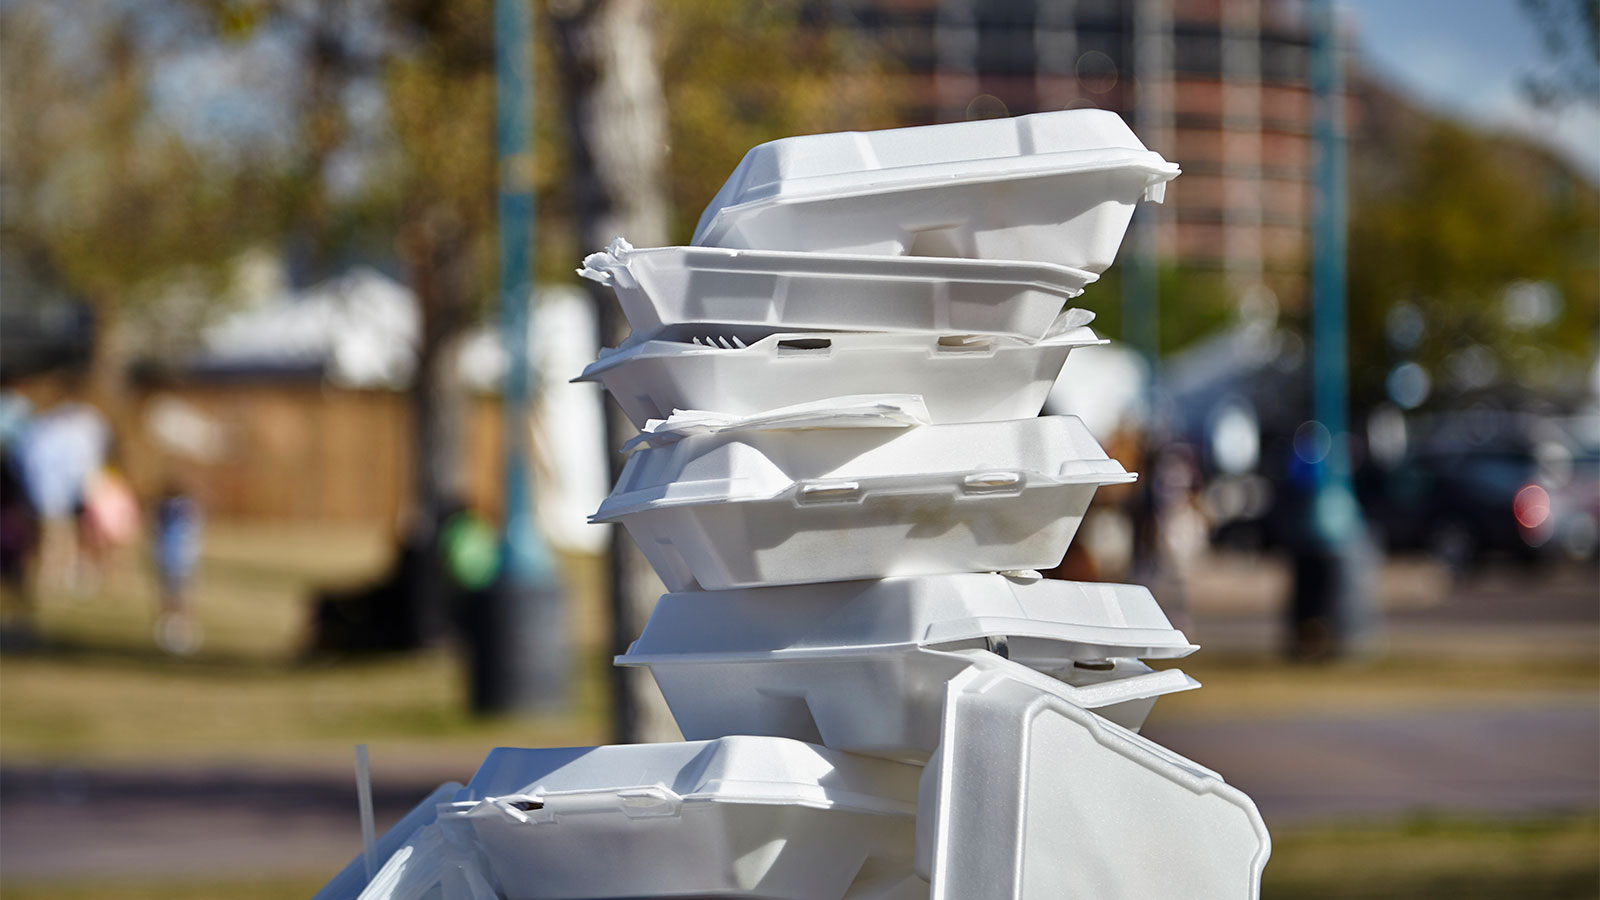 A pile of styrofoam containers piled on a trash can